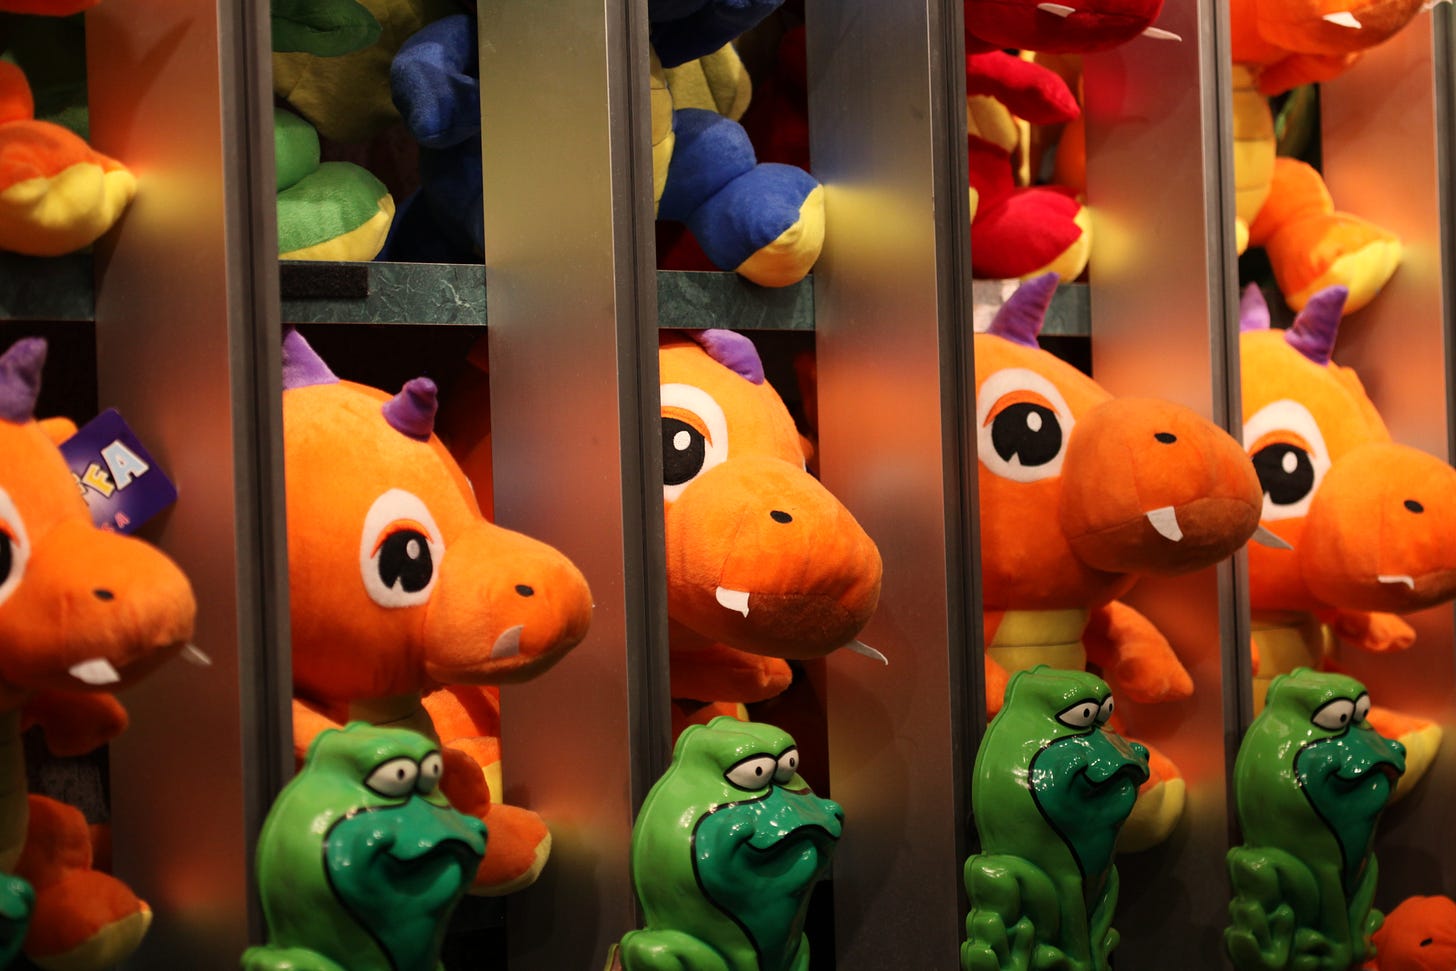 A series of stuffed animals in rows.